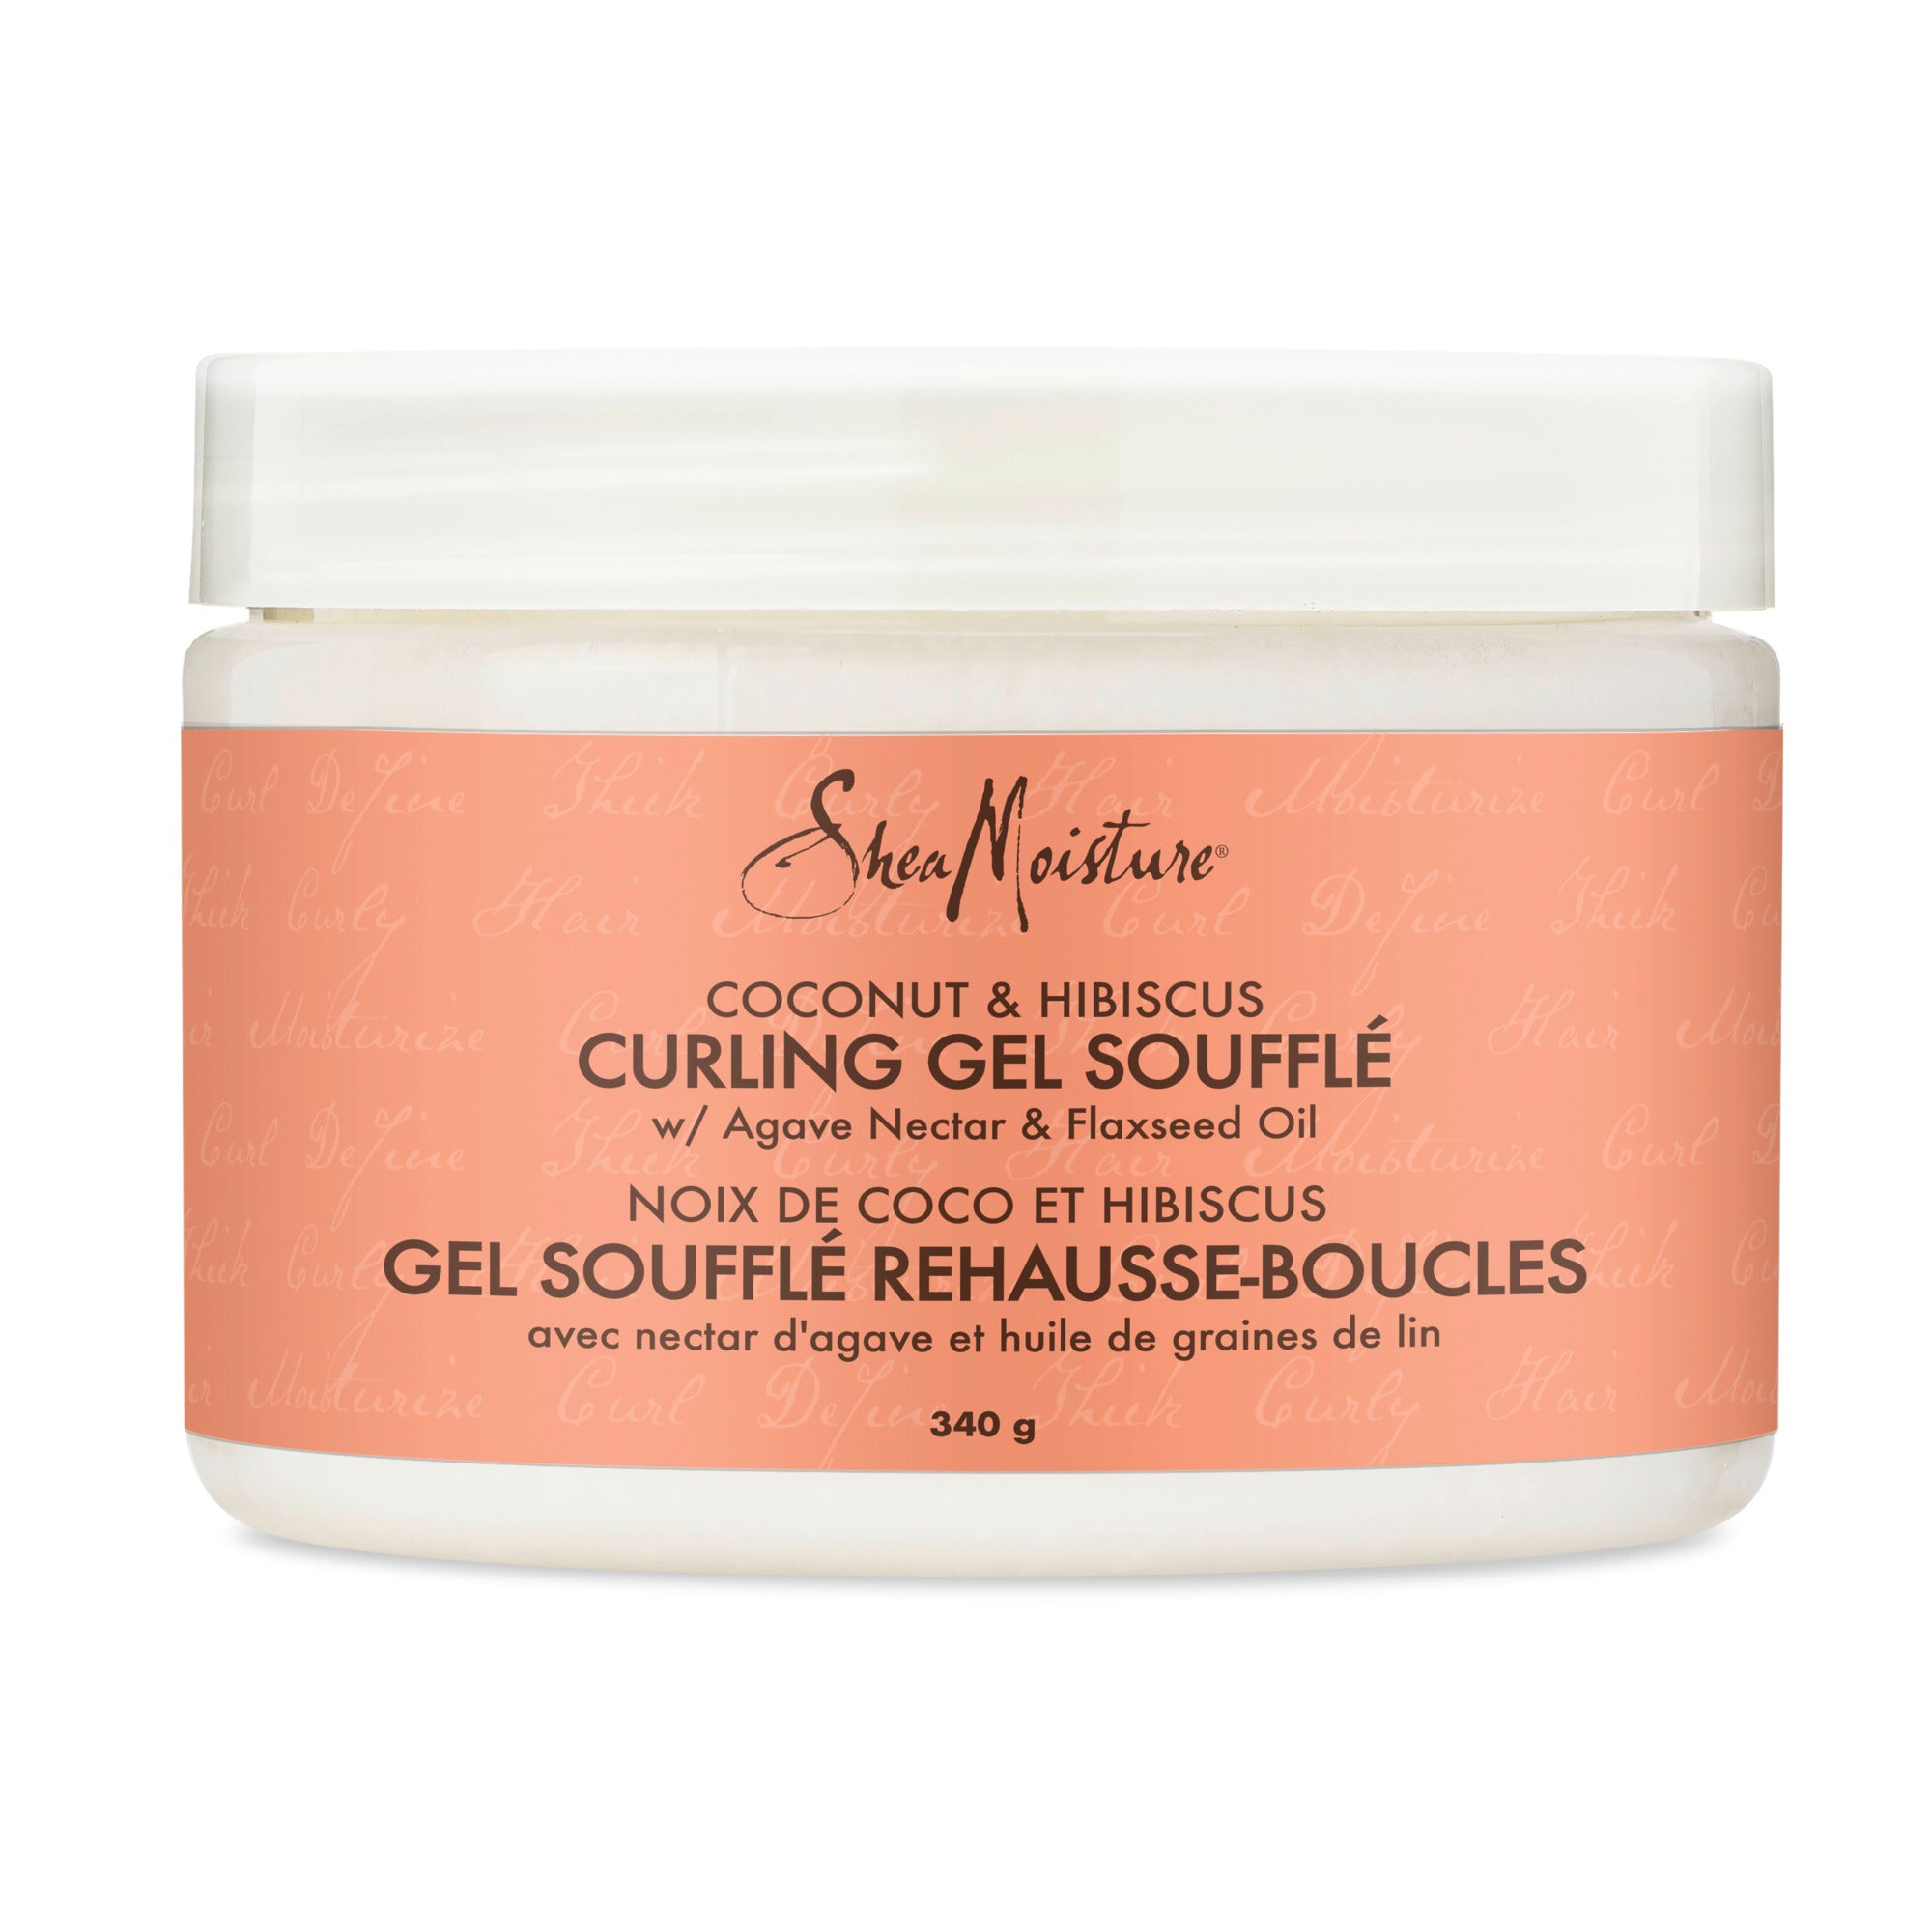 Showing the front angle view of the SheaMoisture Coconut & Hibiscus Gel Curl Souffle 340g product.